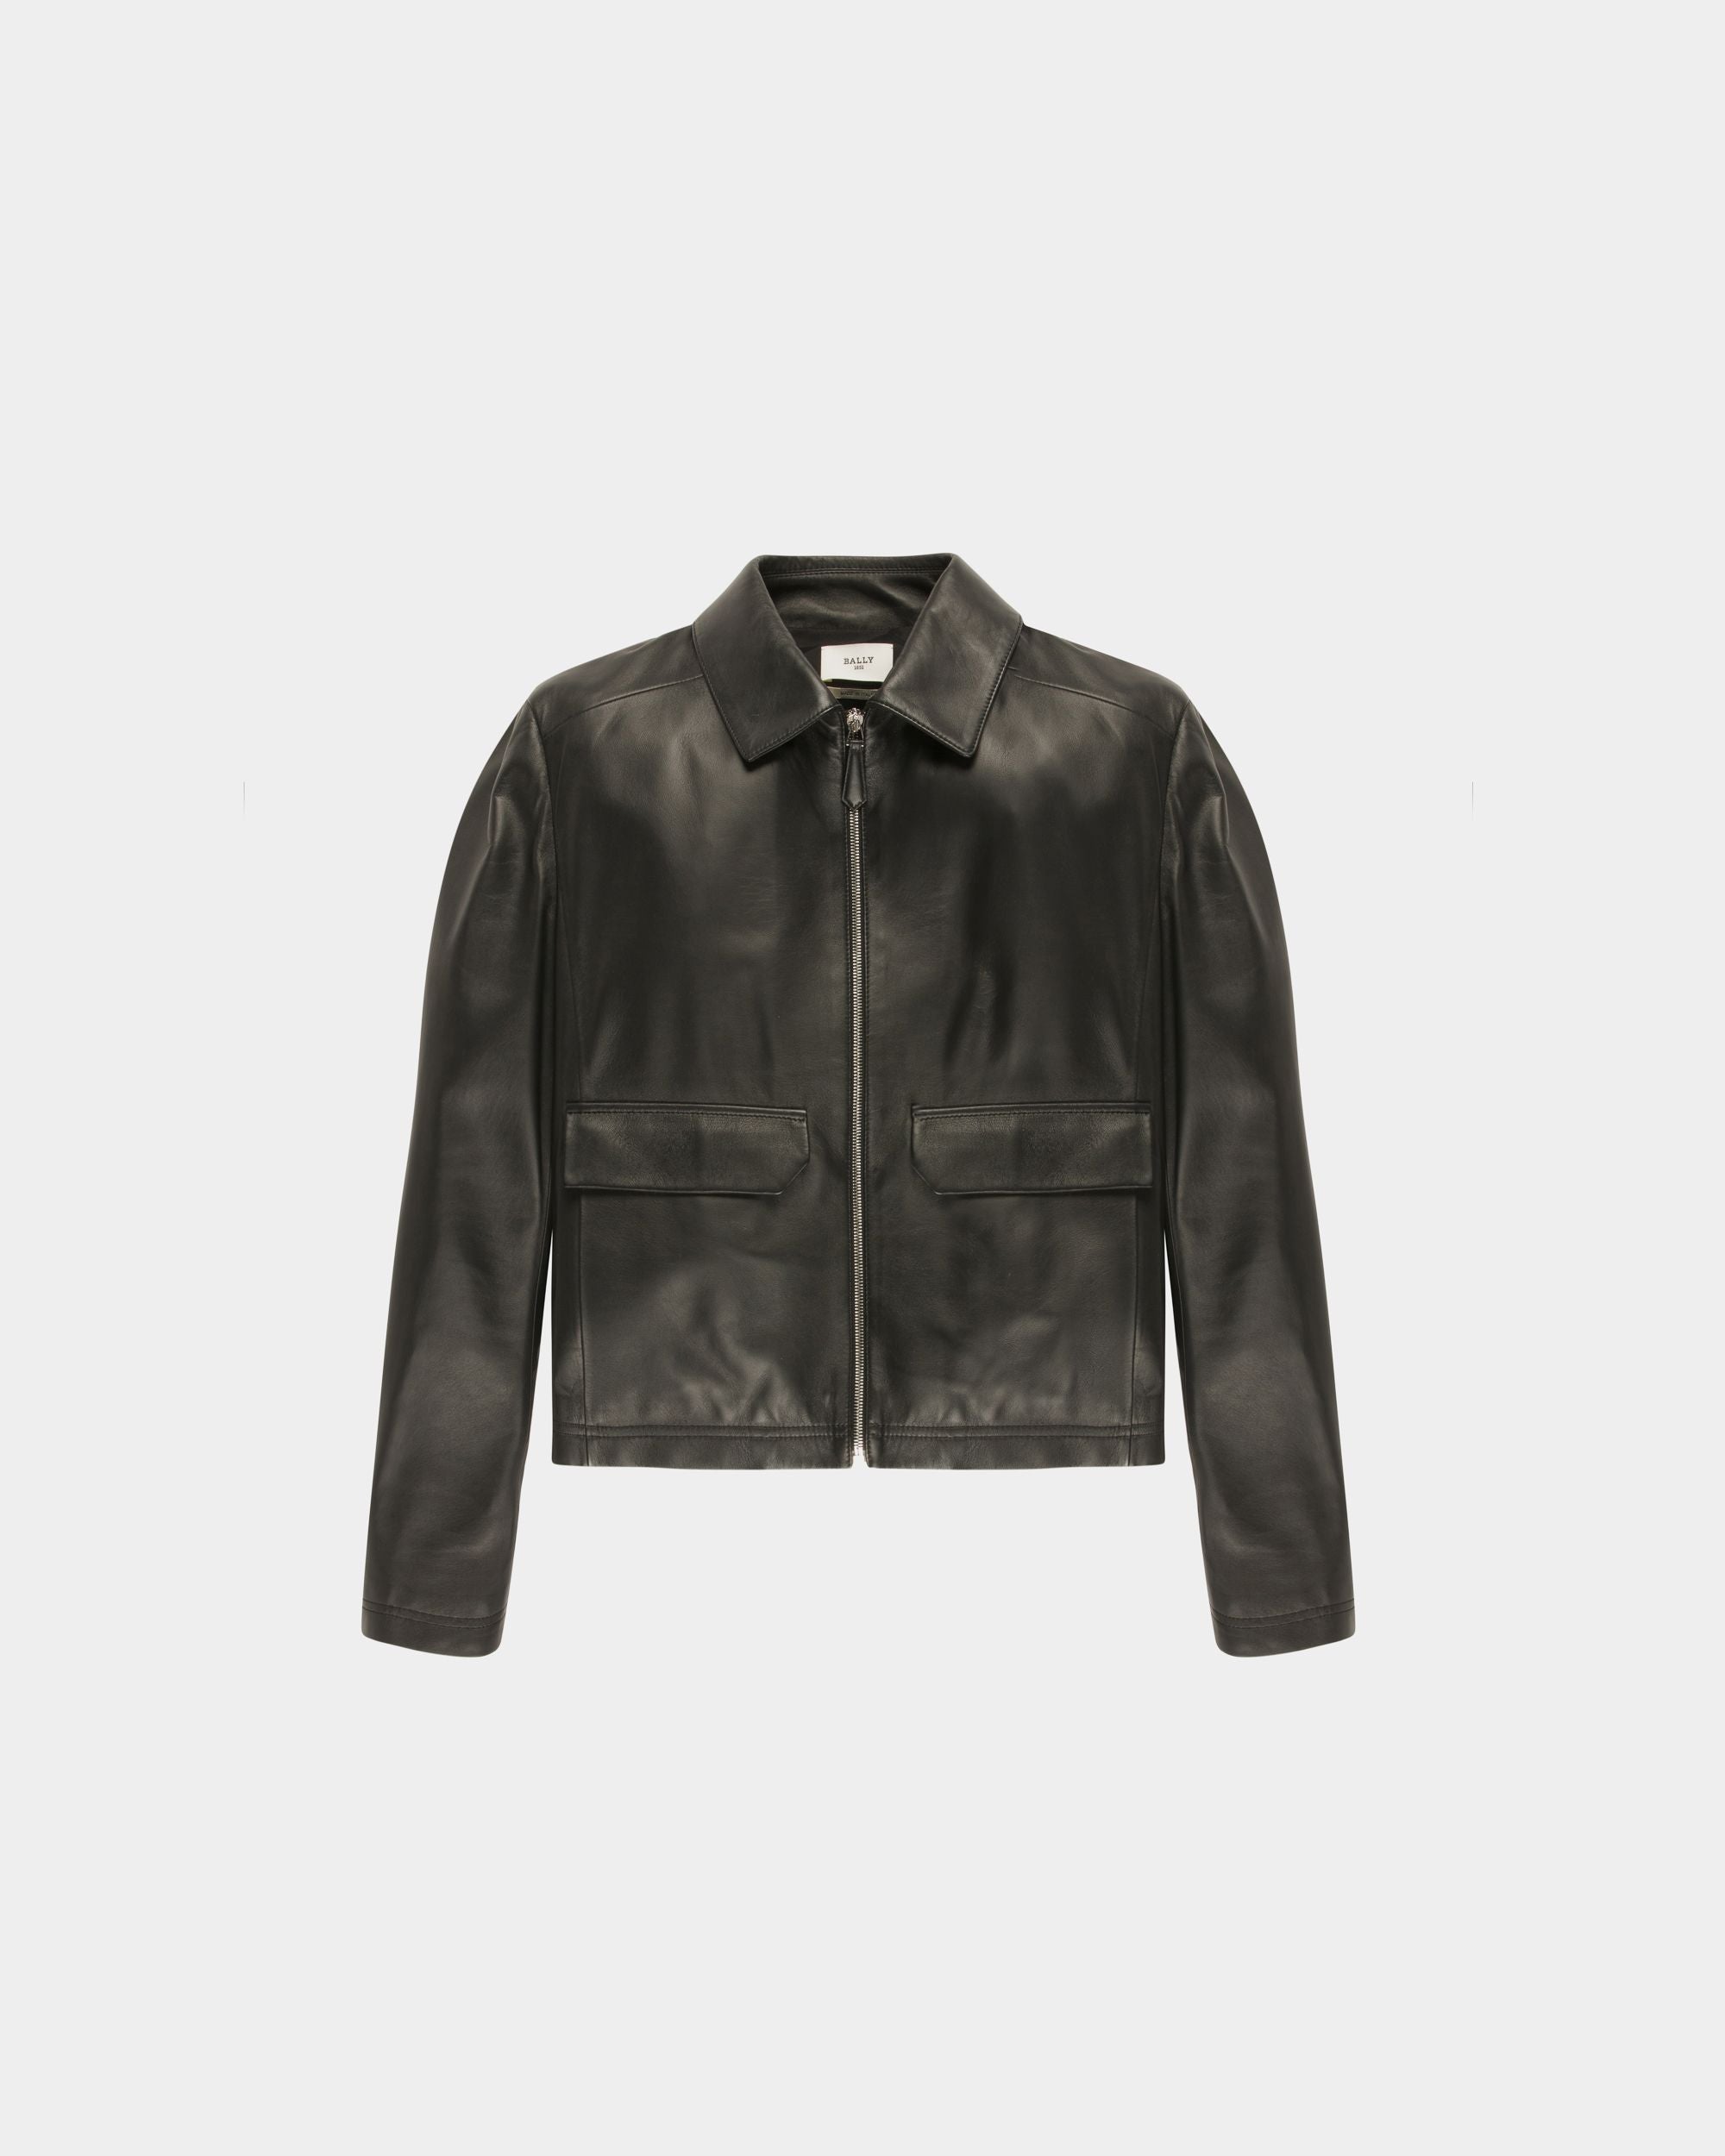 Men's Designer Leather Jackets, Coats, Trousers | Bally